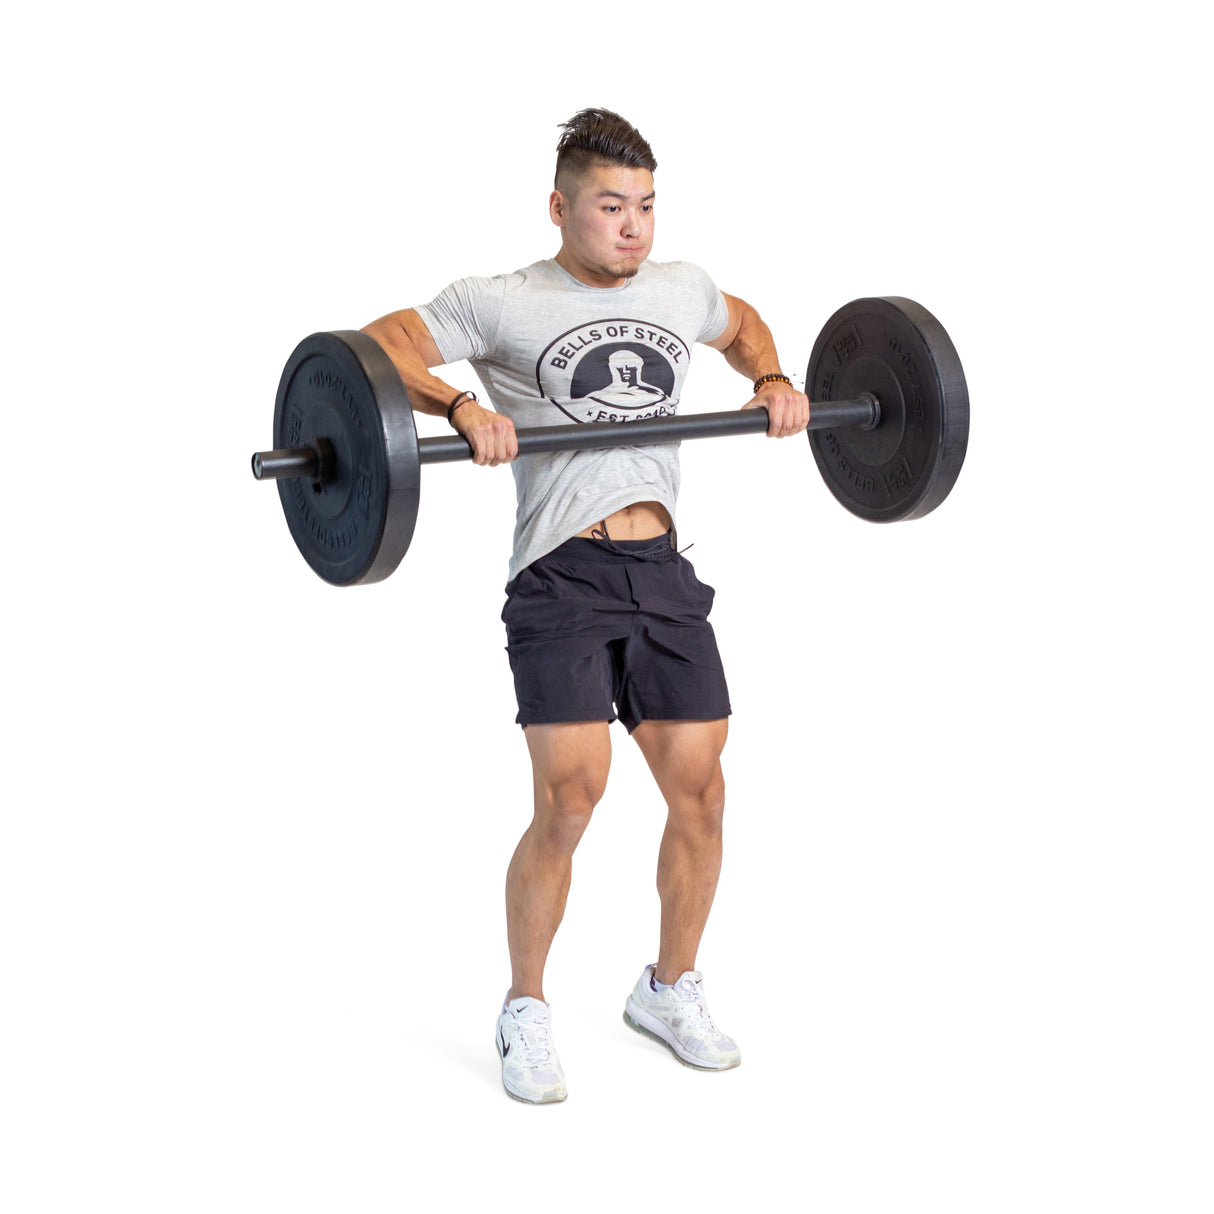 Male athlete doing barbell workout using short axel bar